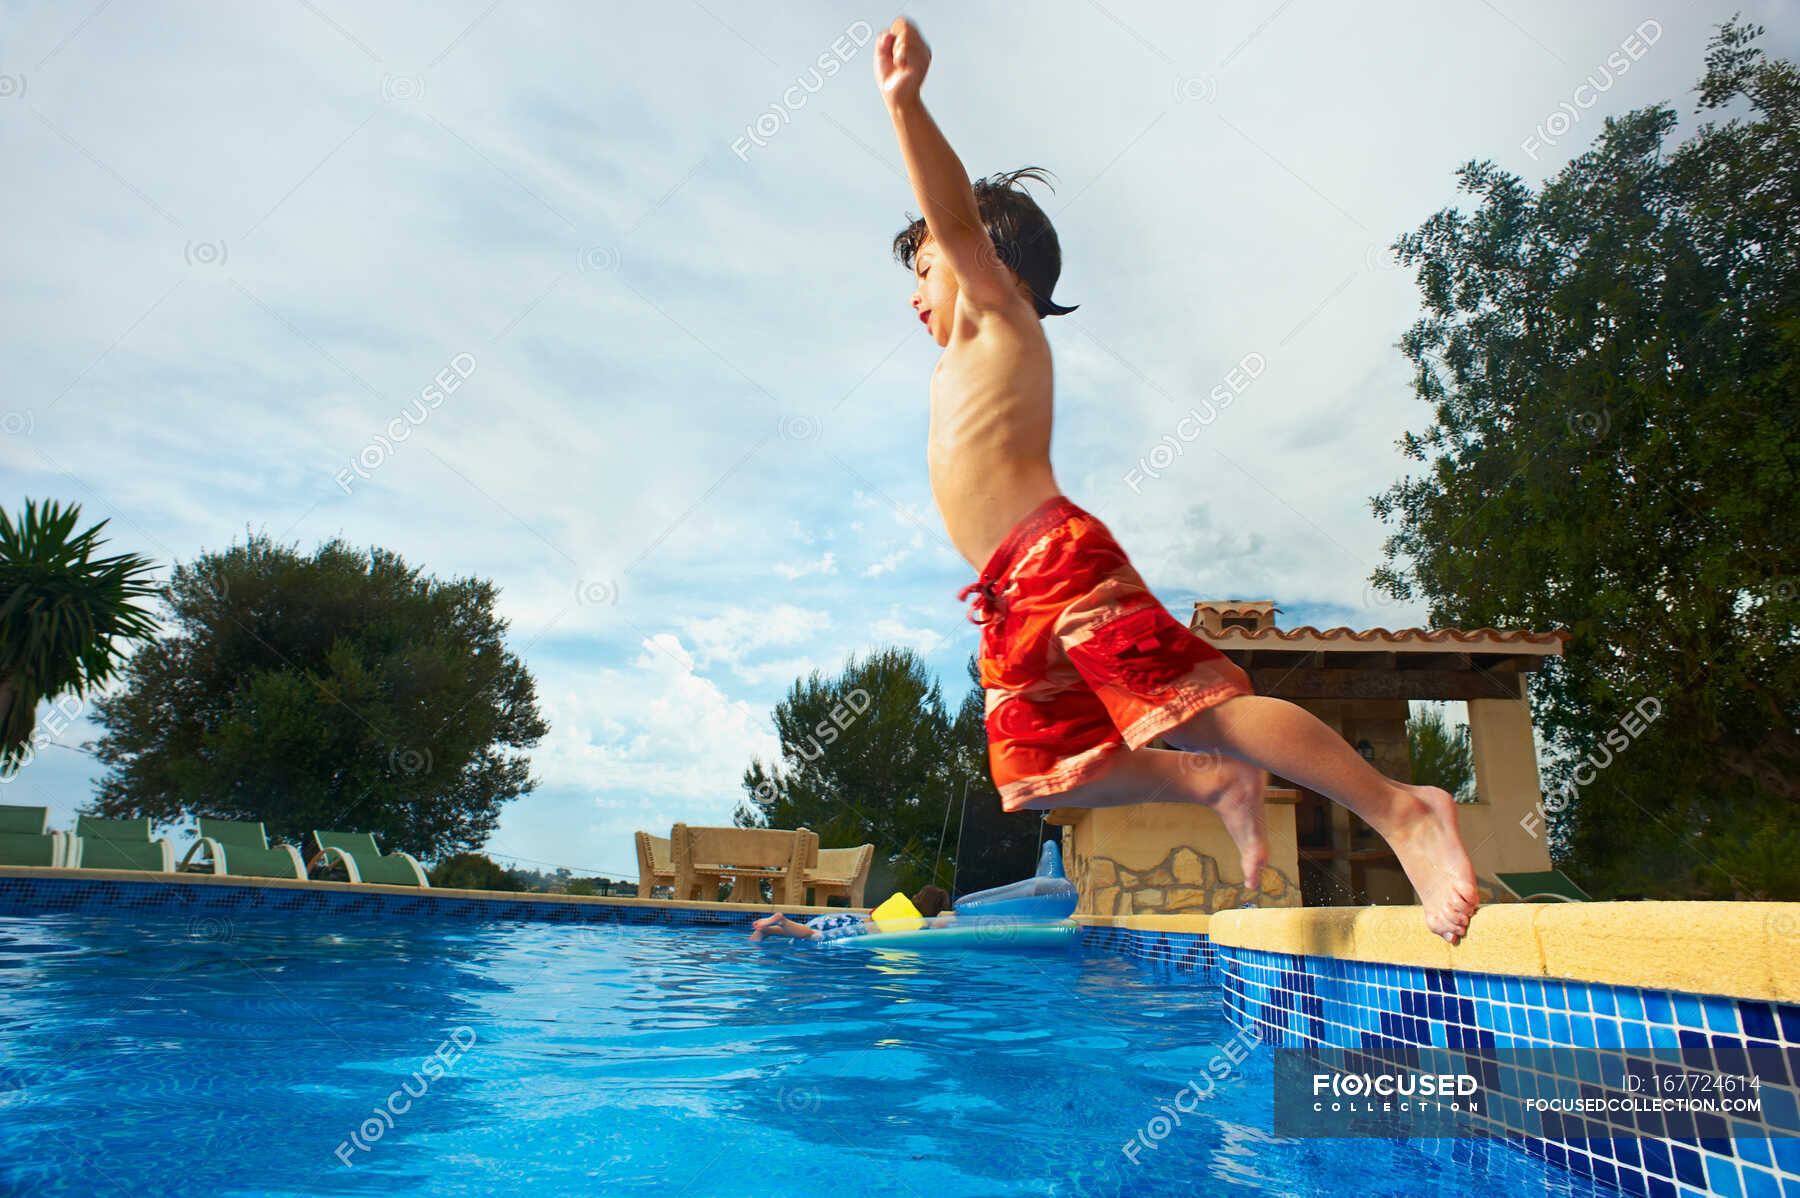 Young Boy Jumping Into Swimming Pool — Happiness Freedom Stock Photo